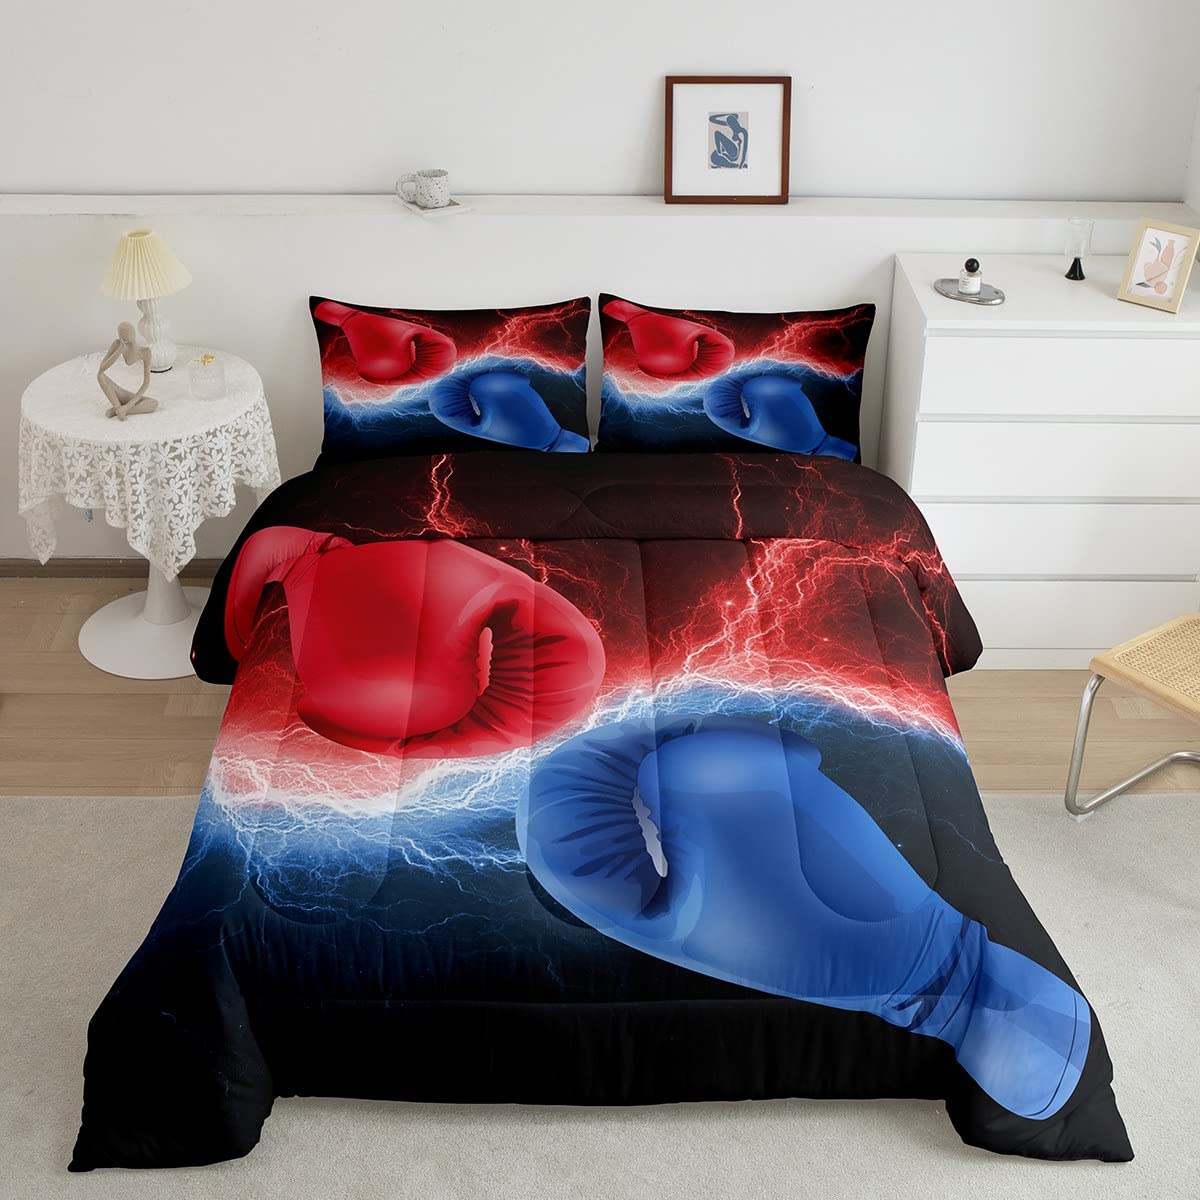 Erosebridal Boxing Comforter Set Queen Size for Adult Teens Boys Competitive Game Boxing Pattern Quilted Duvet Red and Blue Cool Lightning Pattern ...